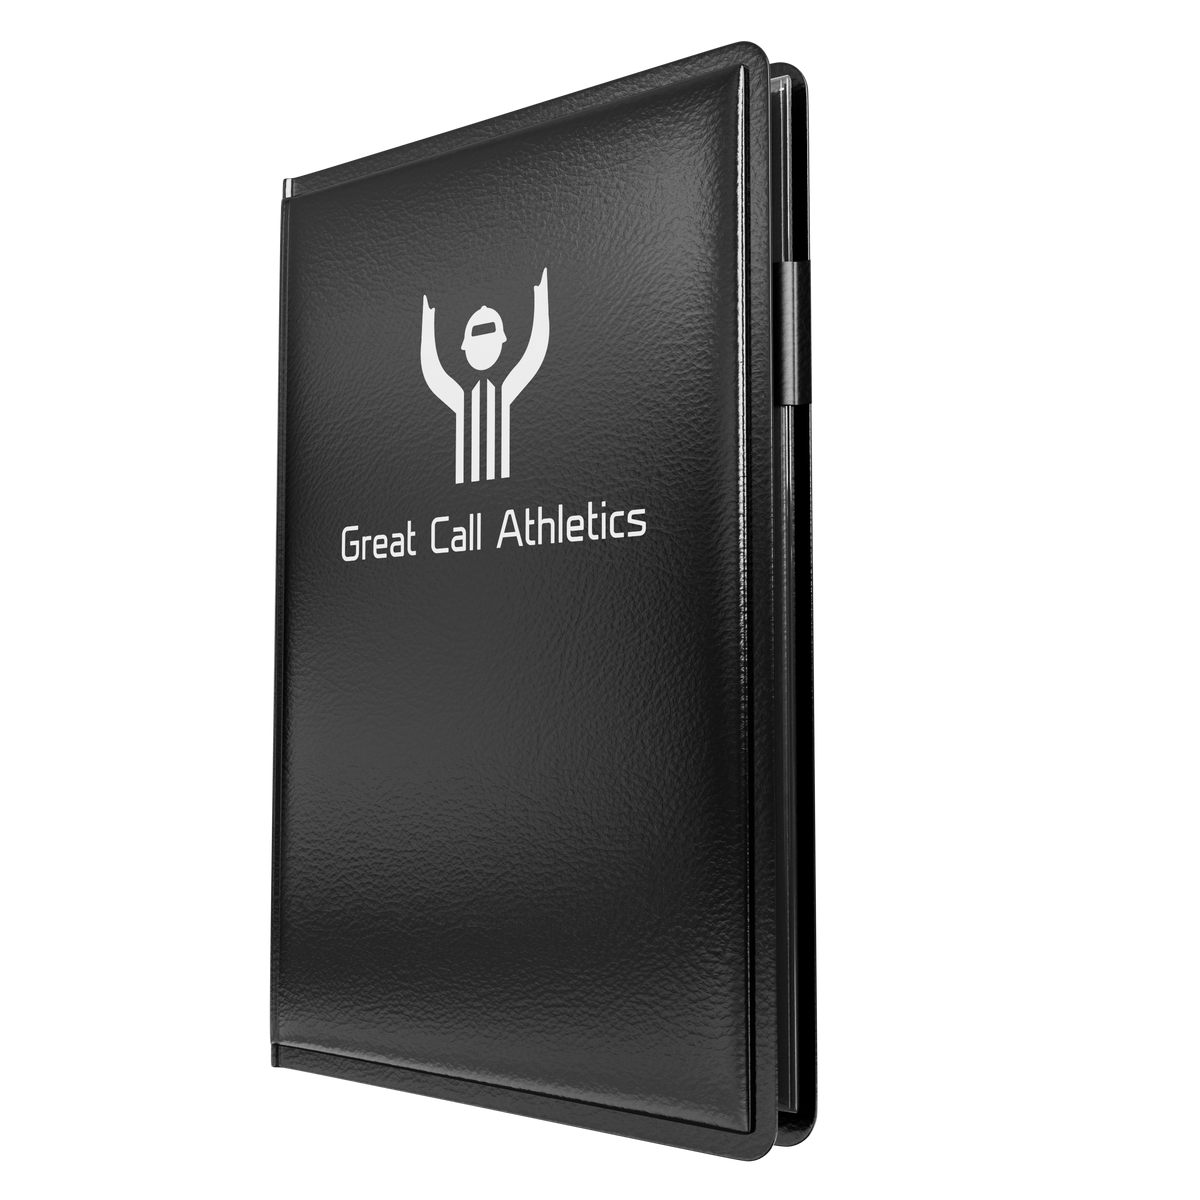 Referee Game Card Holder for football lacrosse umpire